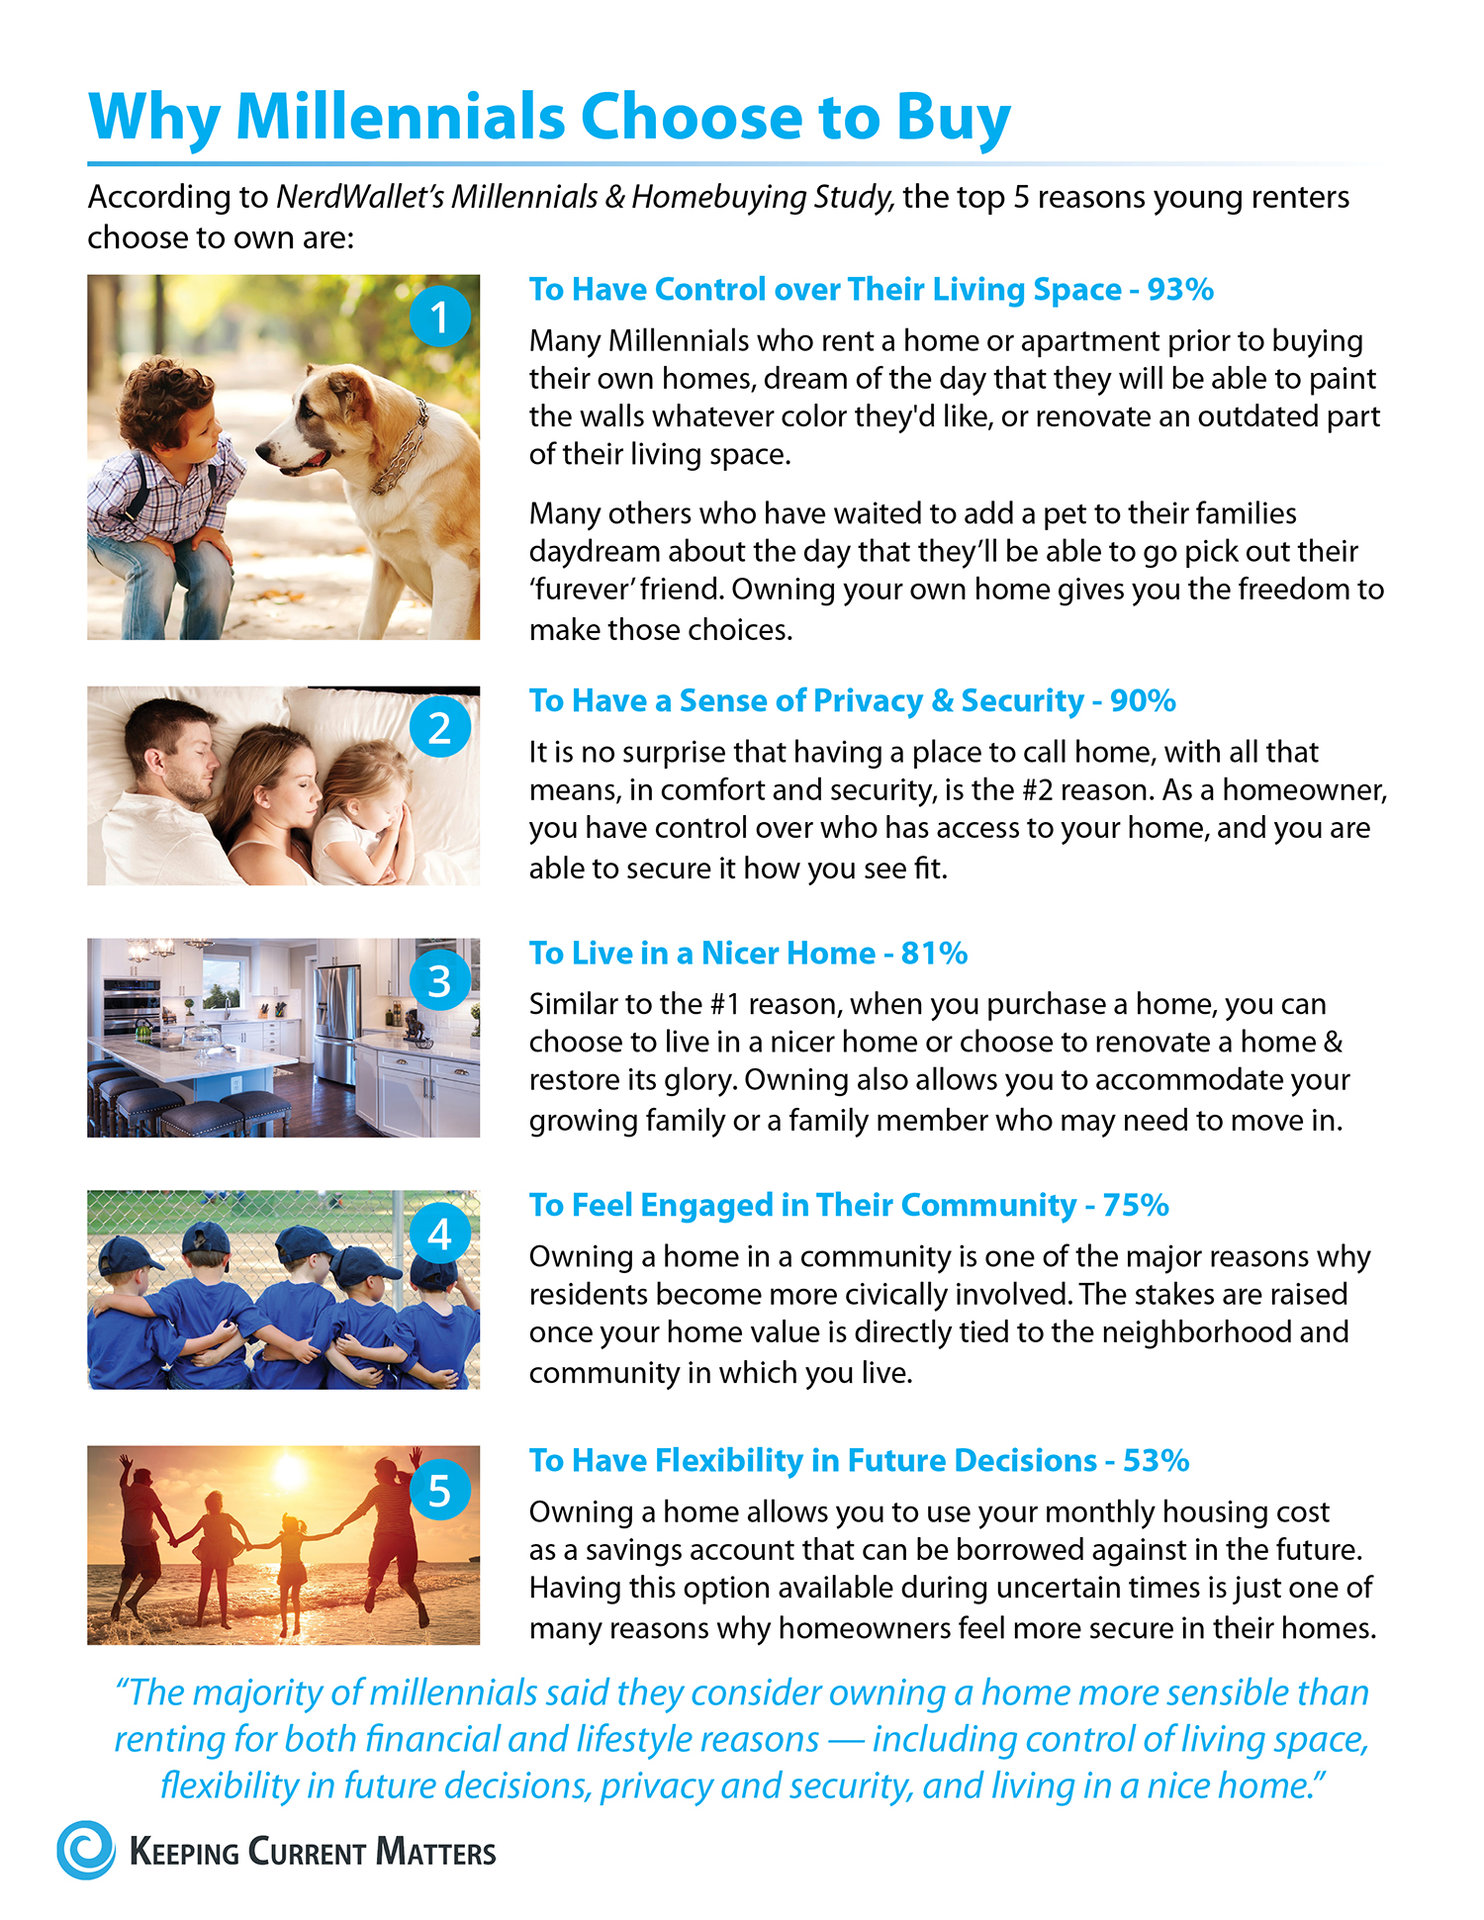 5 Reasons Why Millennials Buy a Home [INFOGRAPHIC] | Keeping Current Matters